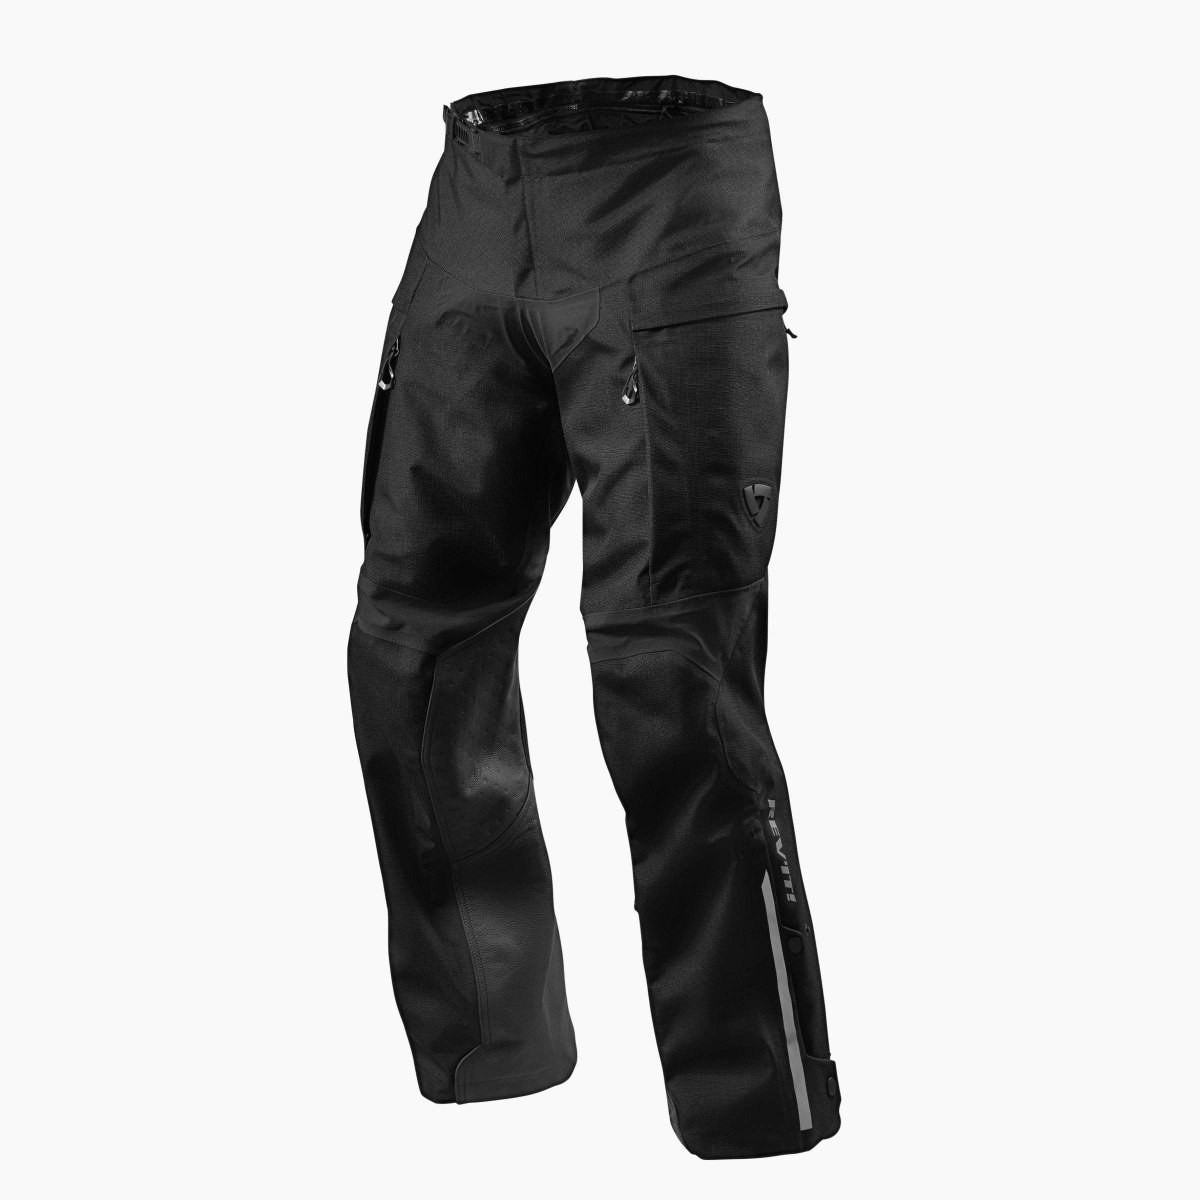 Image of REV'IT! Component H2O Standard Black Motorcycle Pants Size 2XL ID 8700001317689